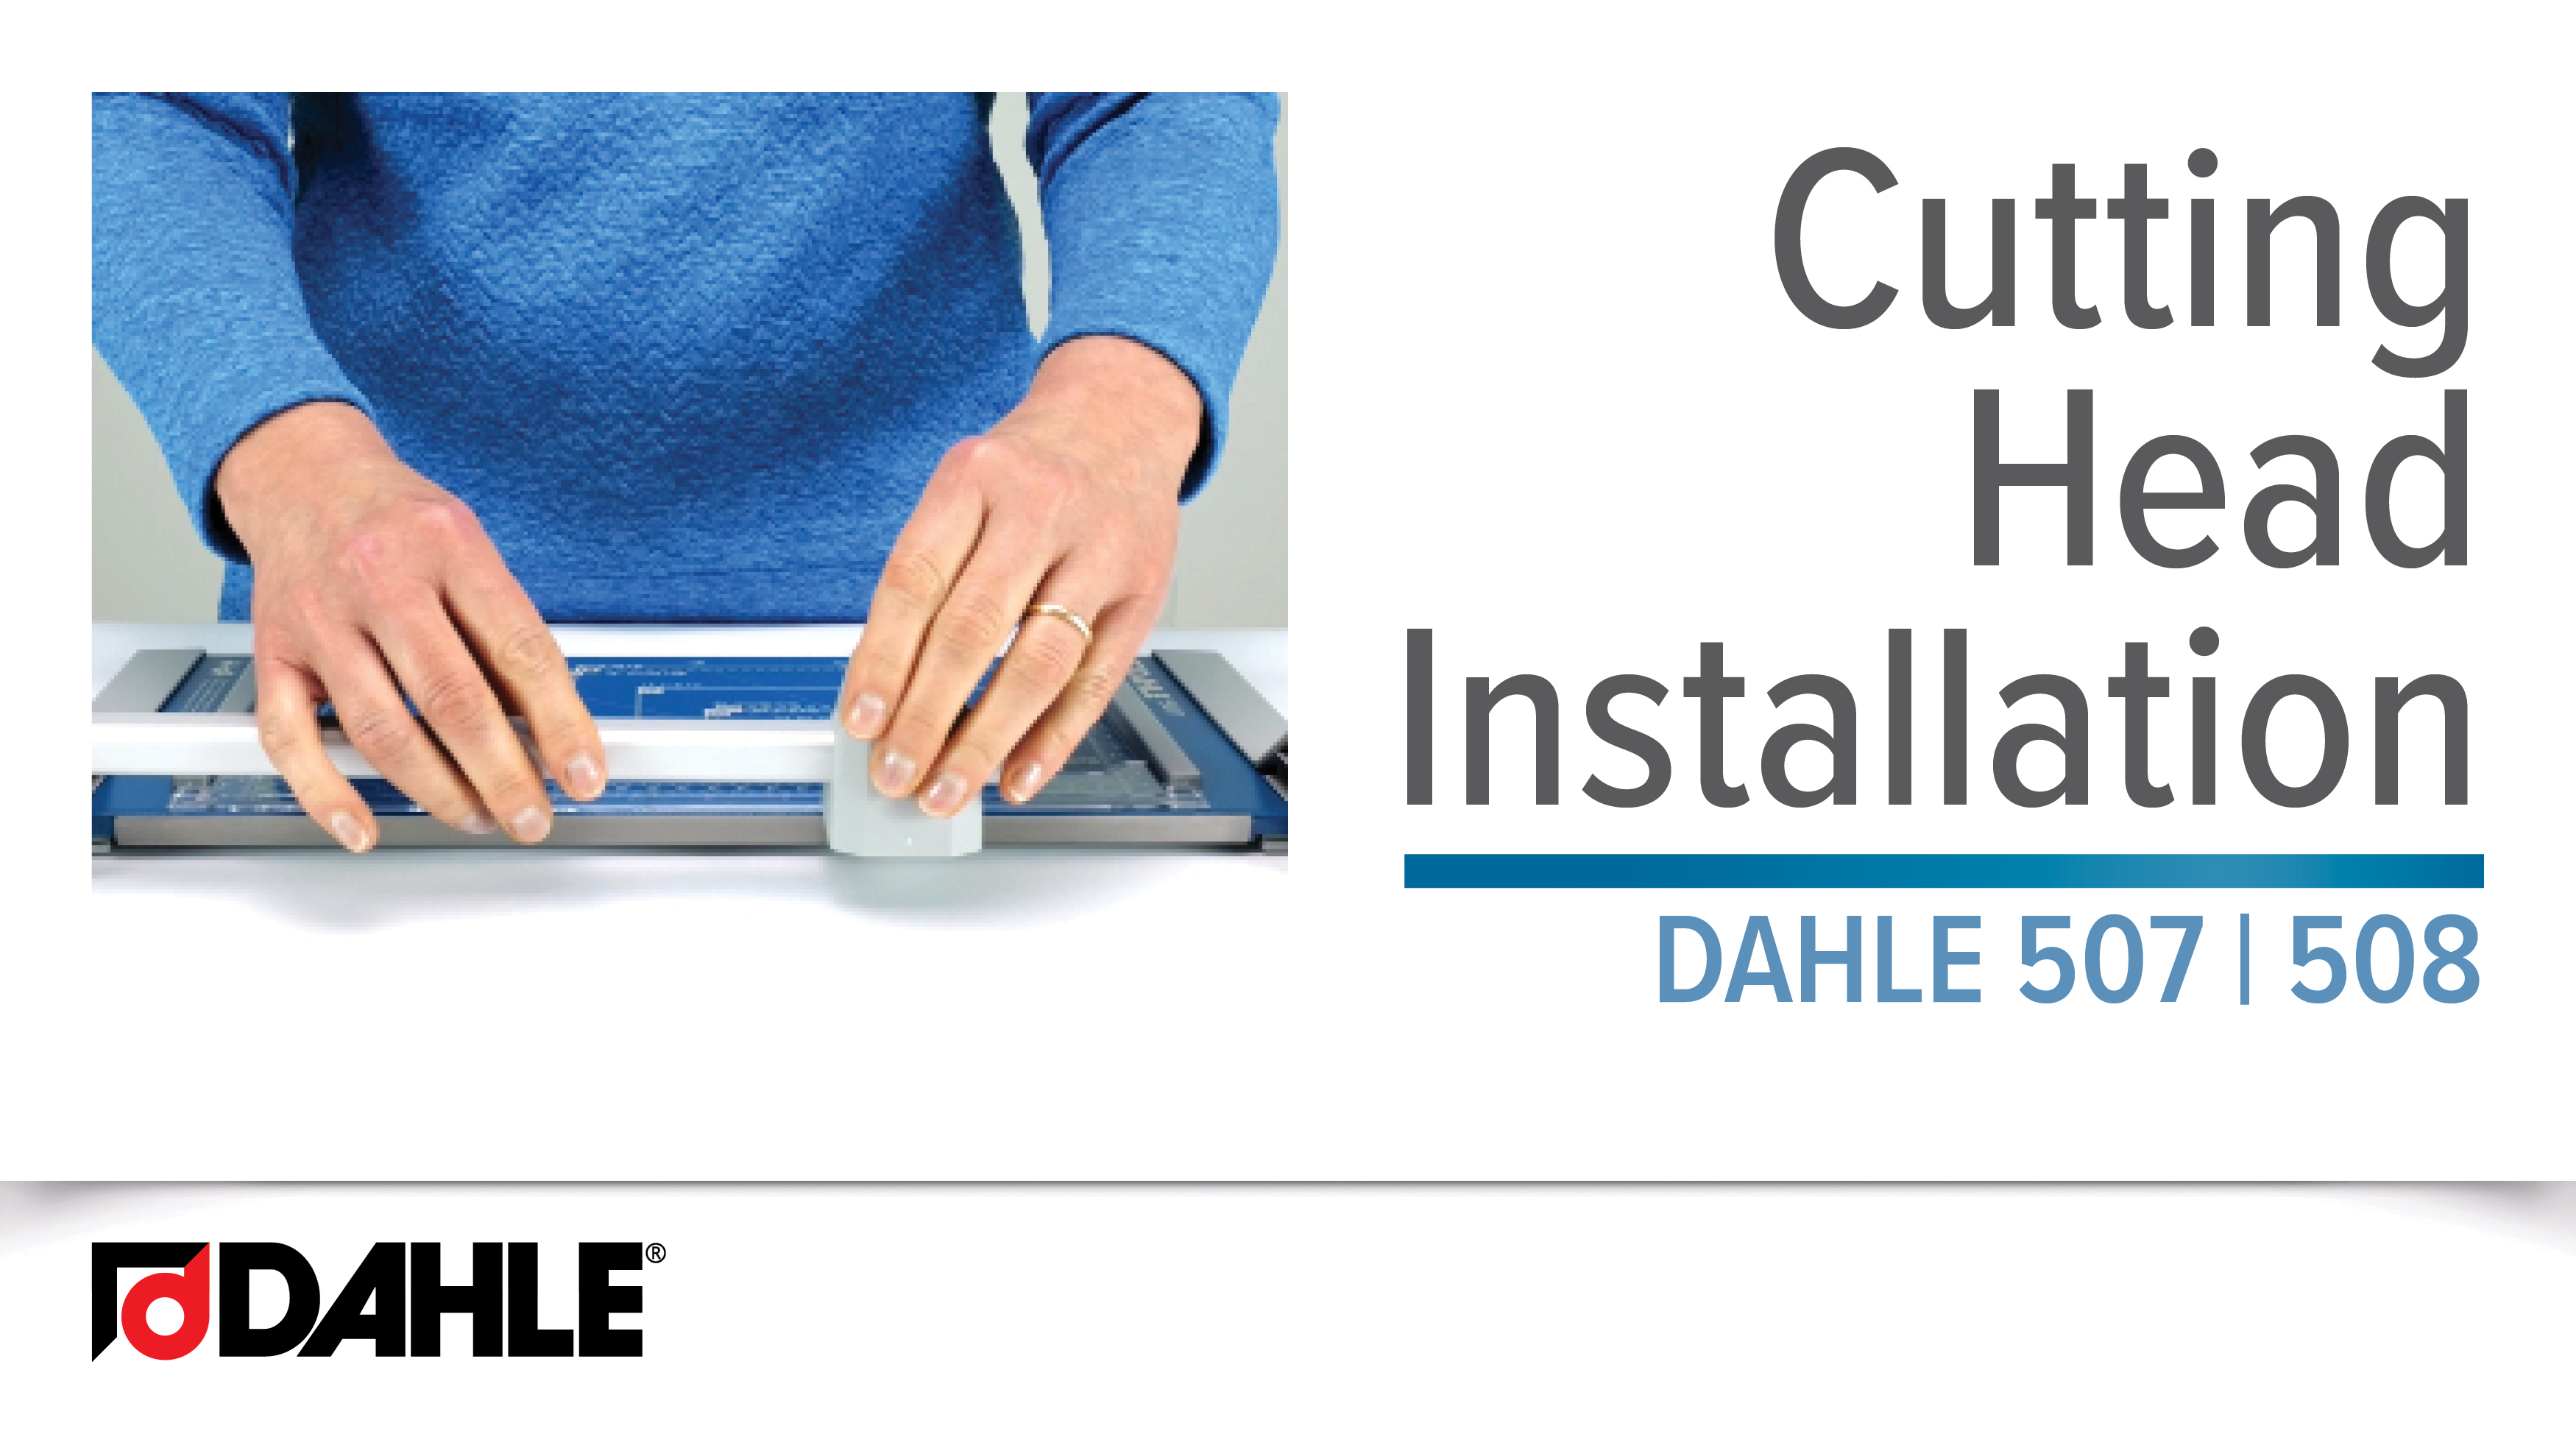 <big><strong>Dahle 508</strong></big><br>Personal Series